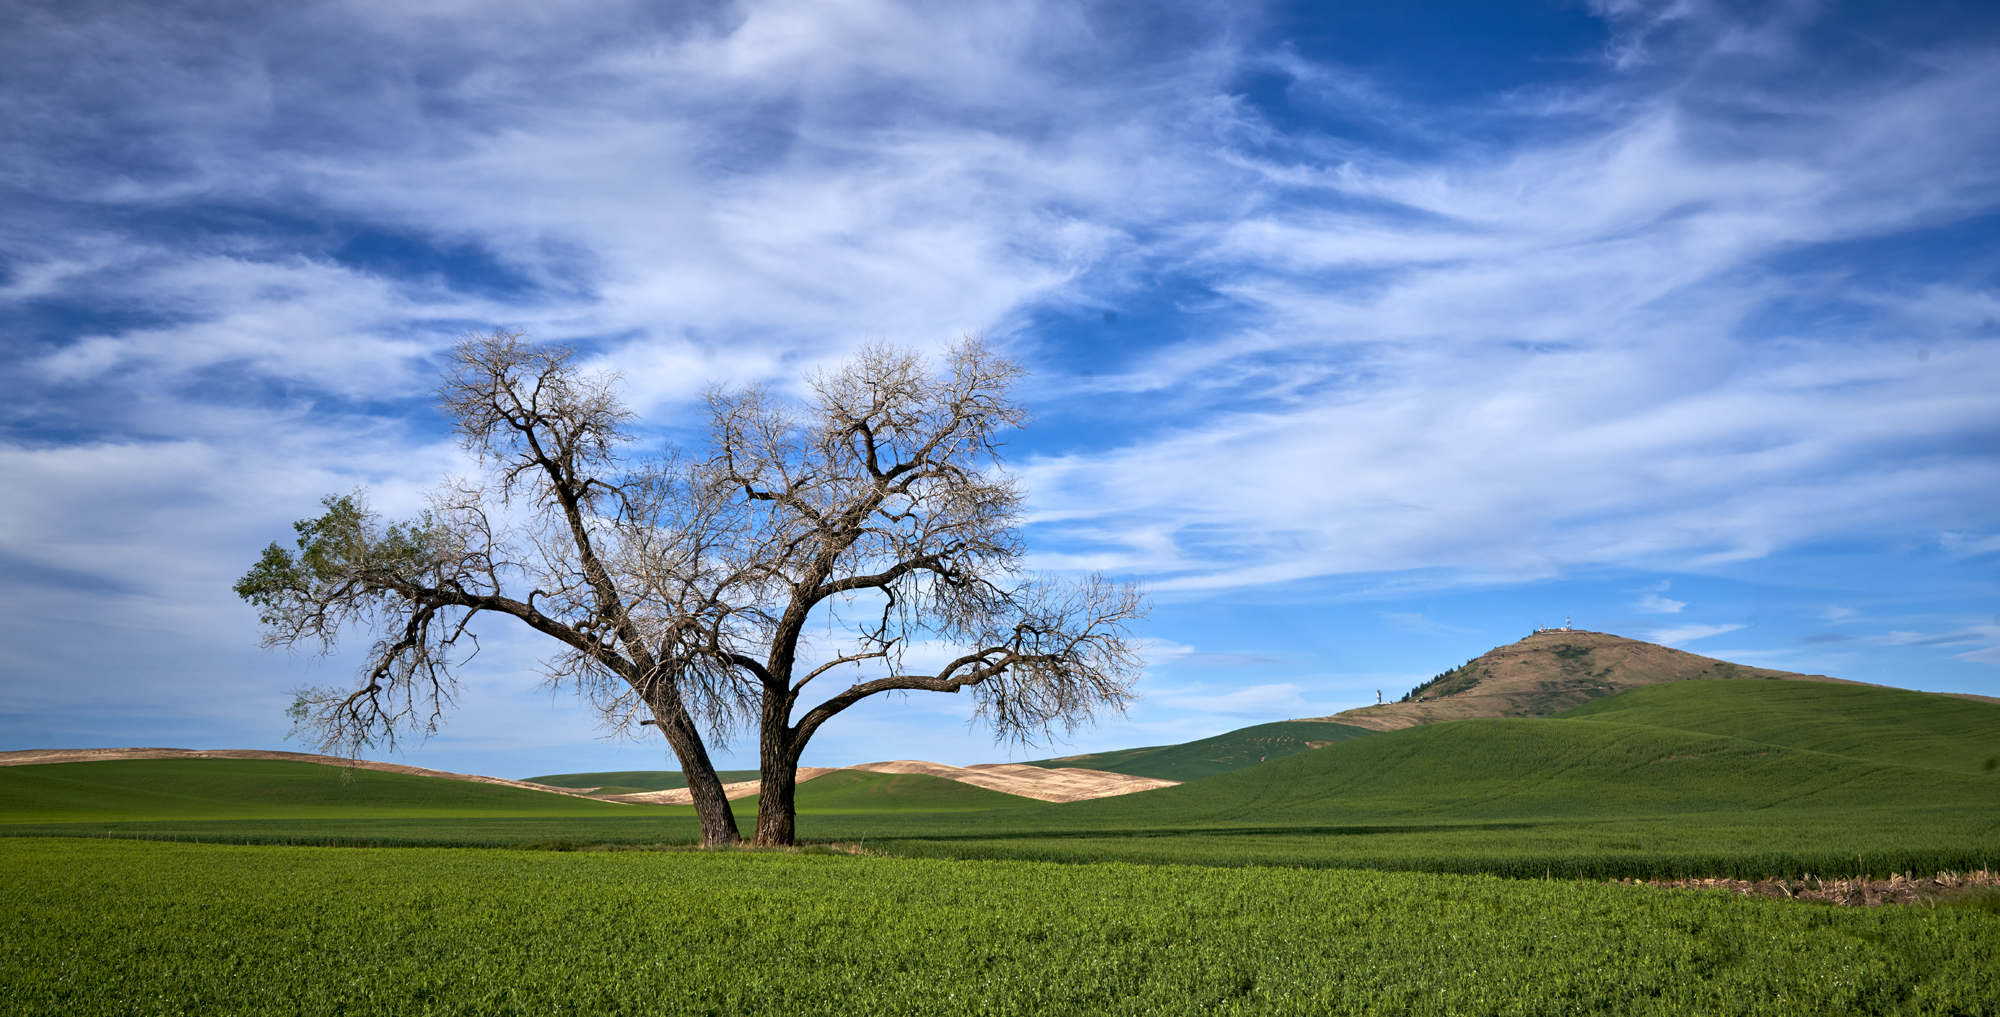 The lone tree with the infamous Steptoe Butte in the background